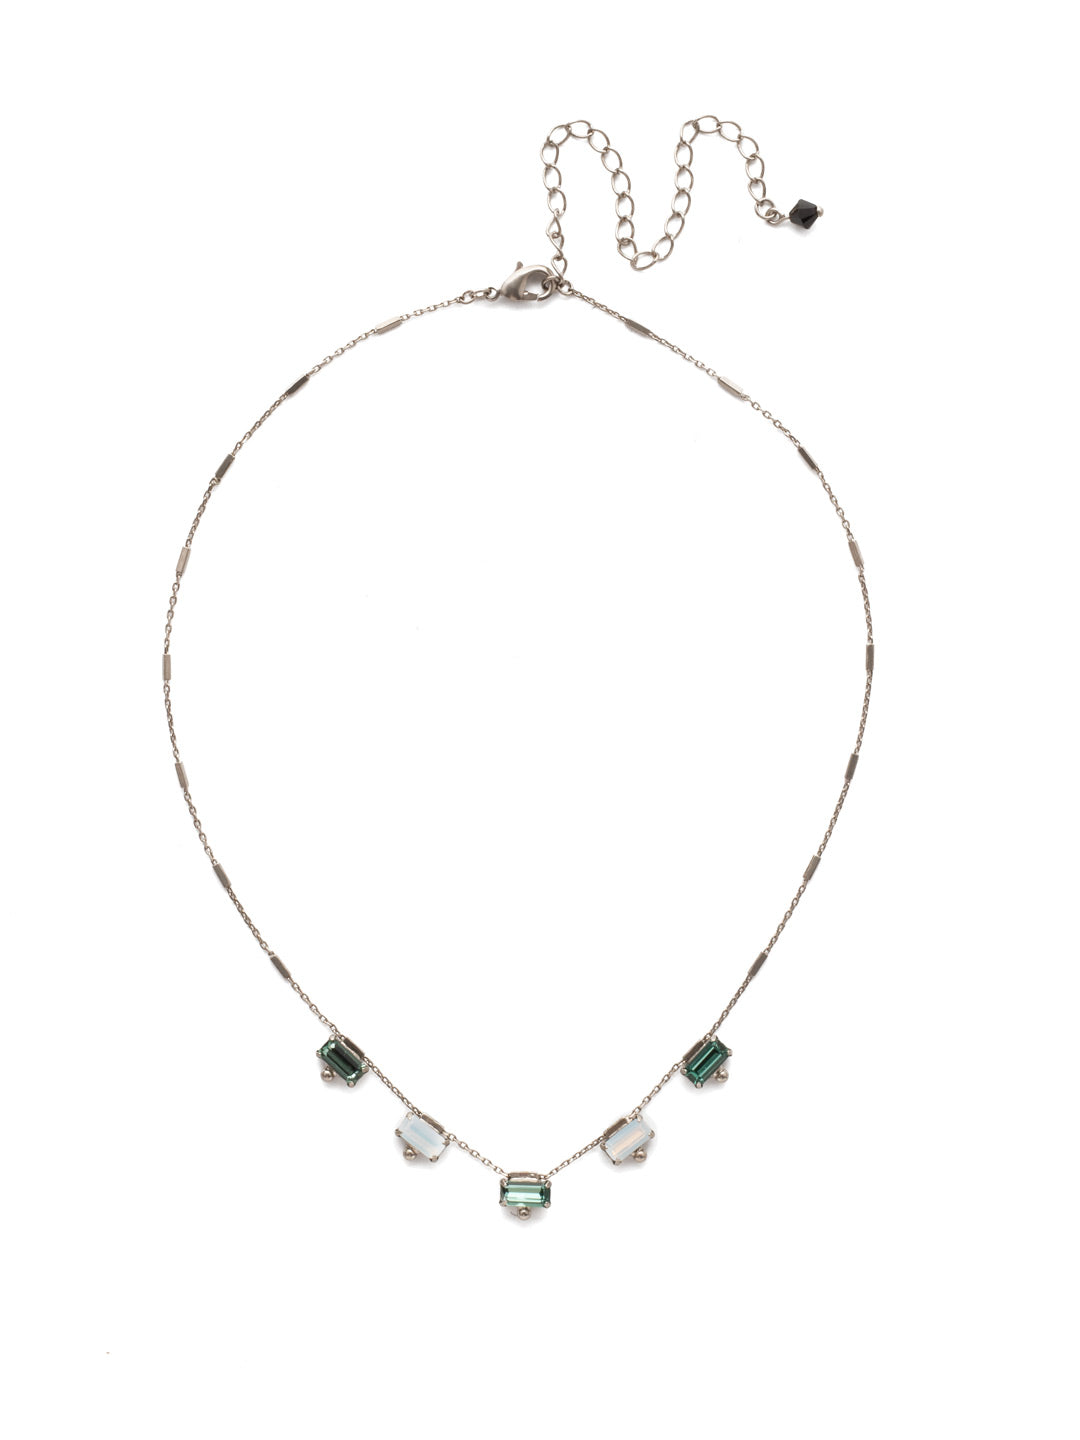 Shine and Dash Tennis Necklace - NDM17ASGDG - Beautifully faceted baguette crystals set in rectangular row offer simple styling that will add a pop of sparkle to your look.